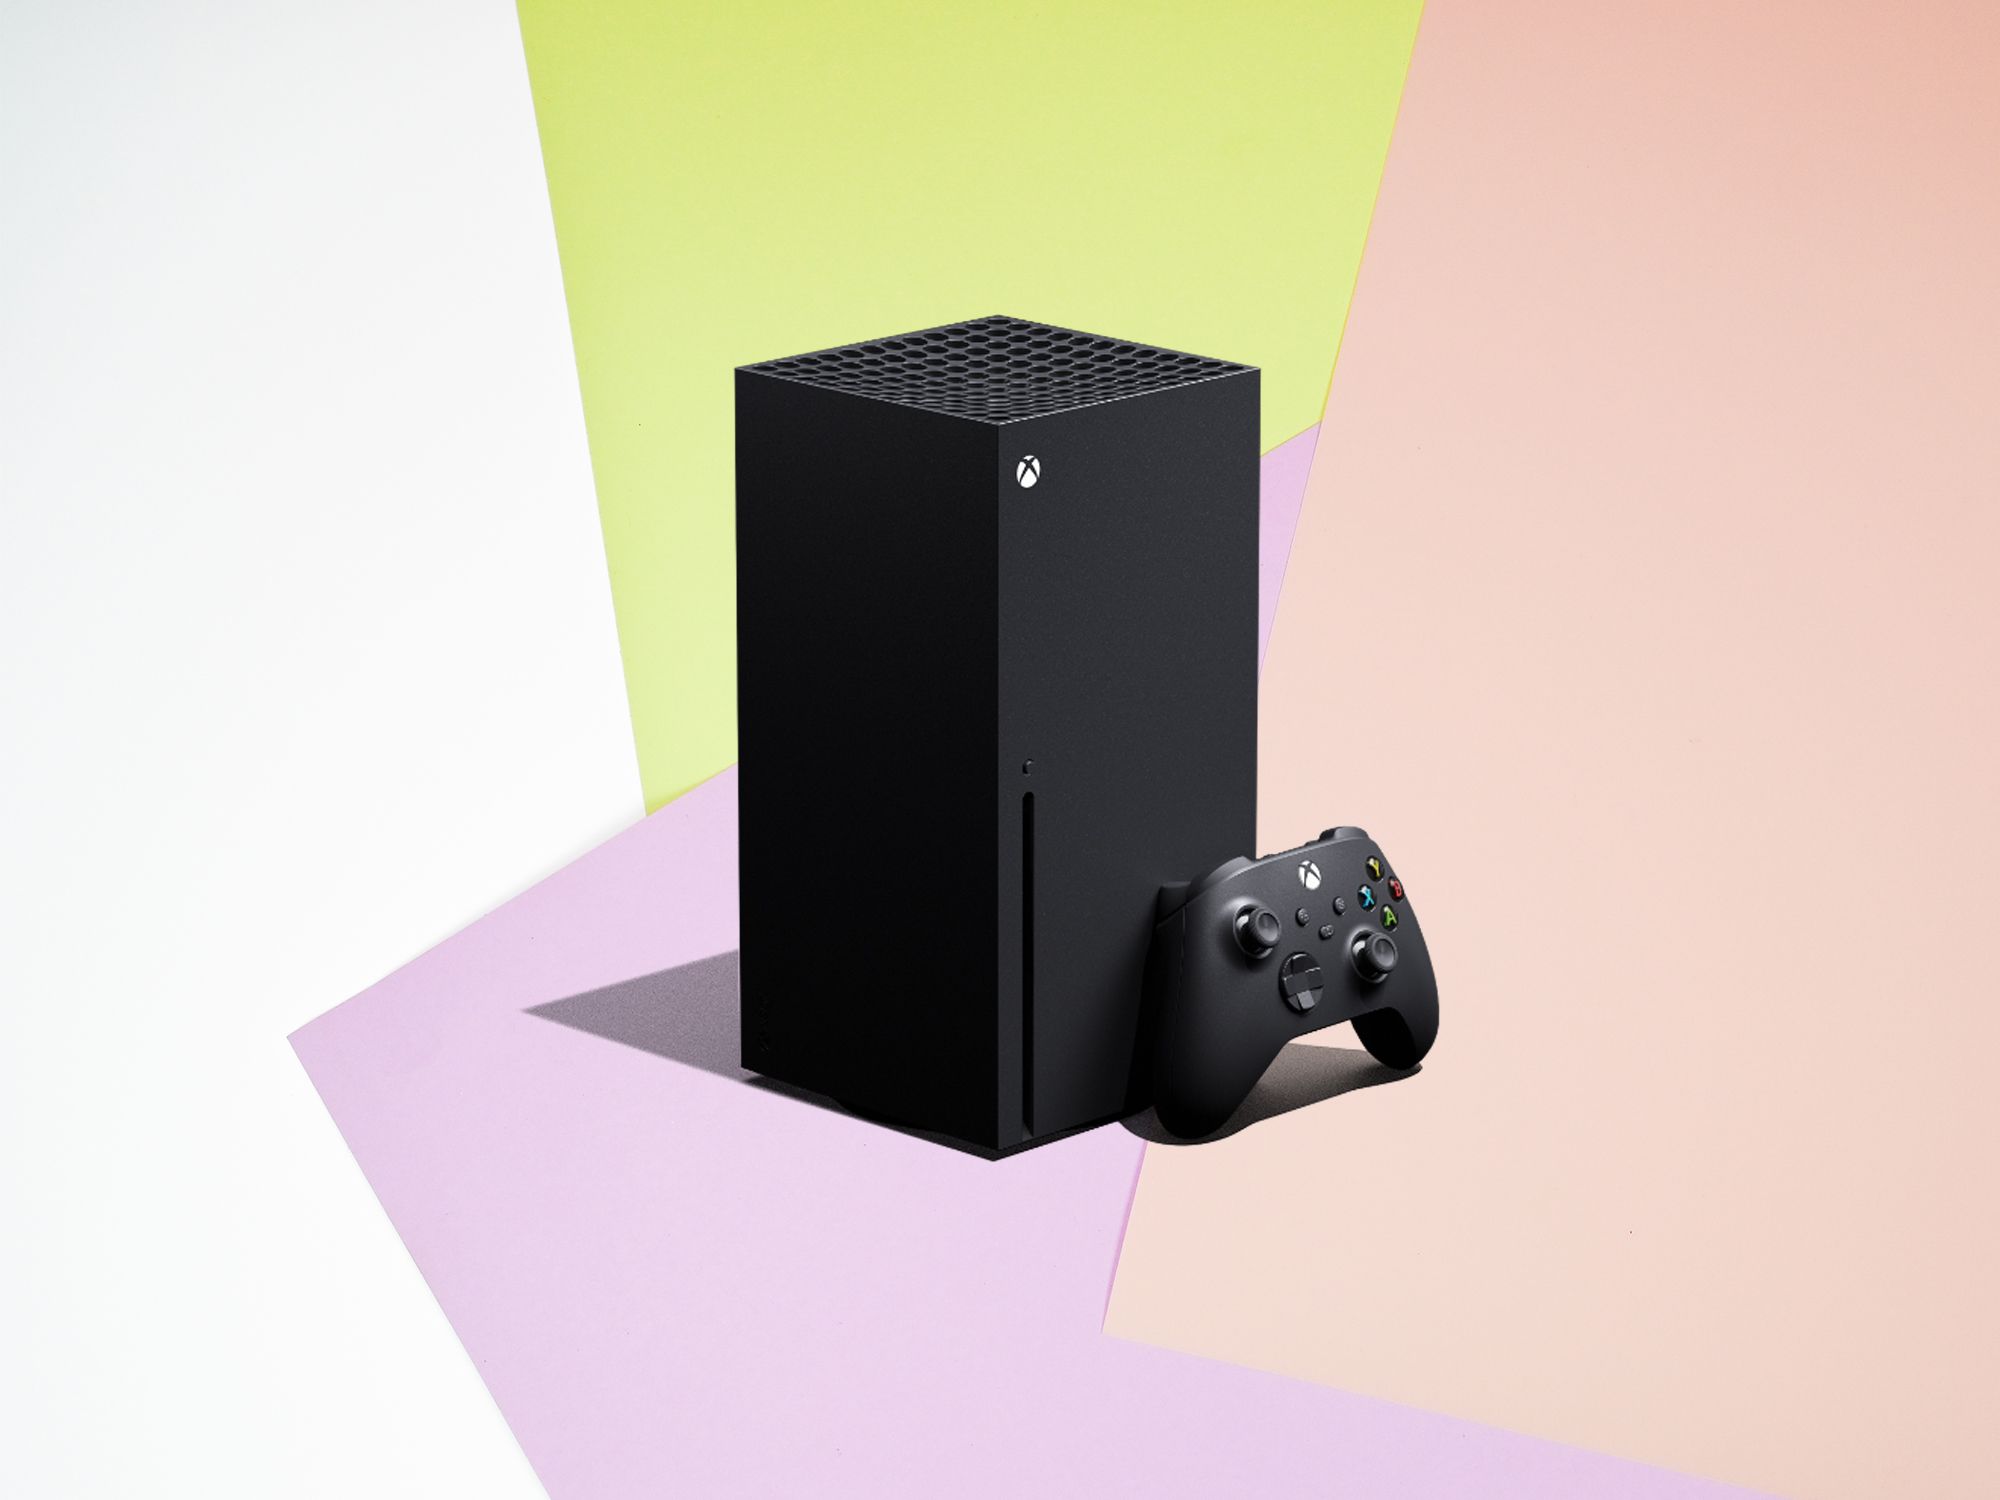 Where to get a PS5 and Xbox Series X on Black Friday - Charlie INTEL